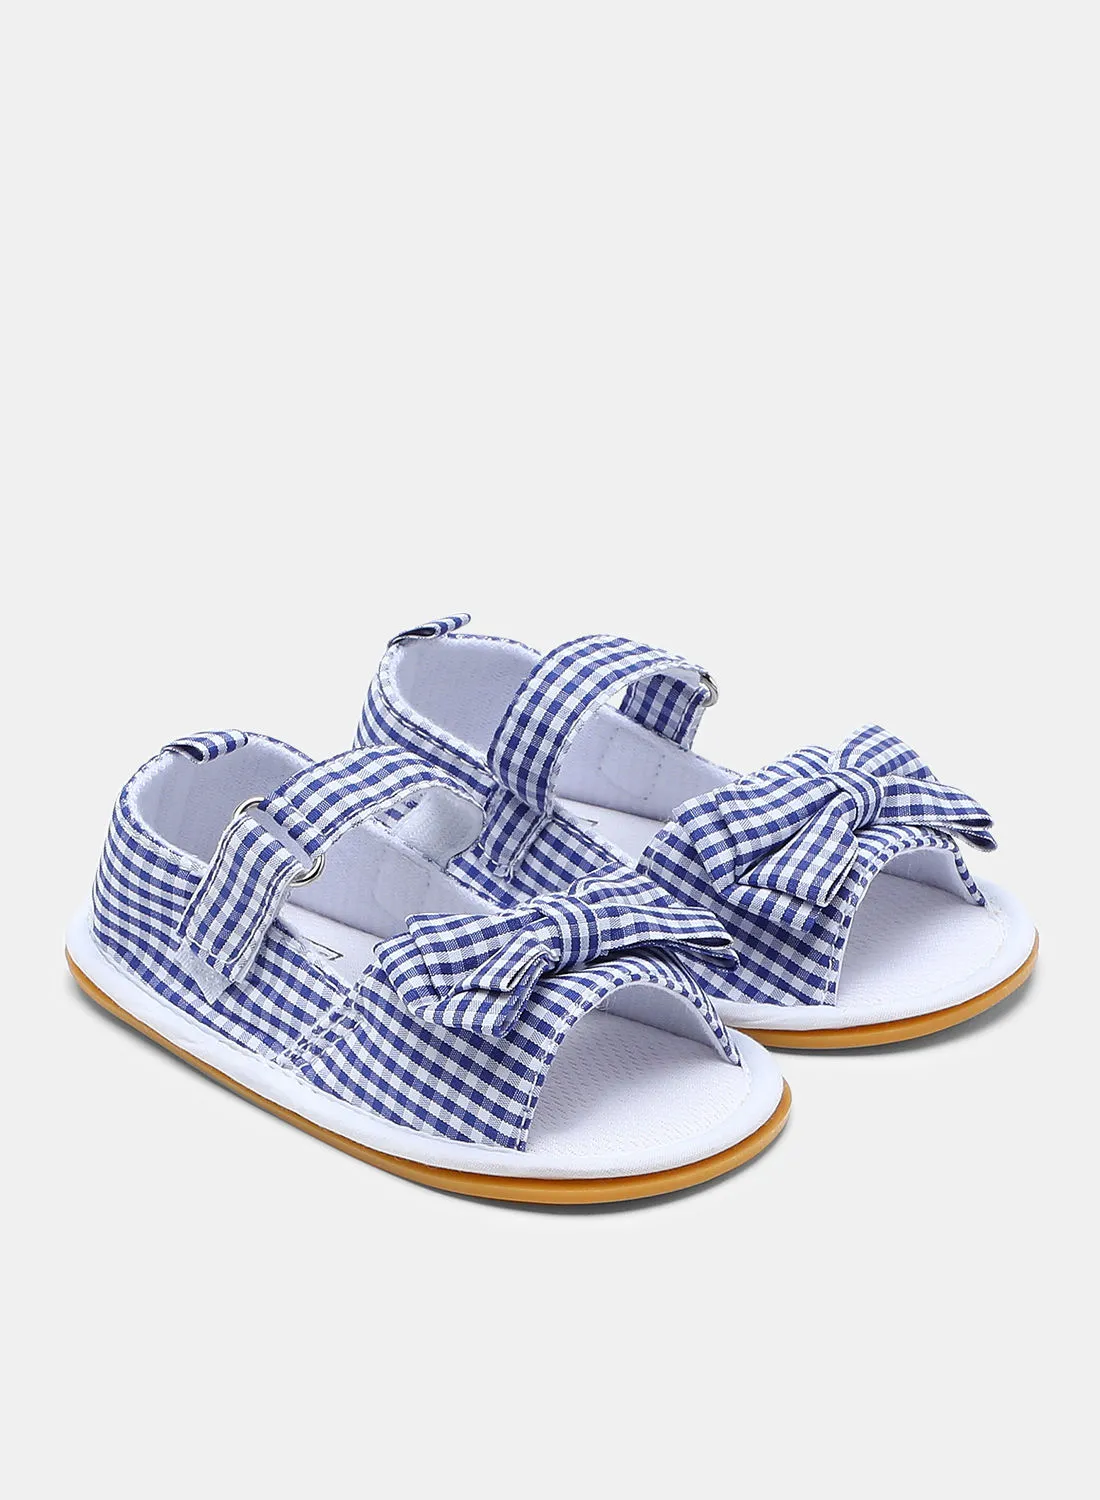 NEON Checkered Pattern Casual Sandals Blue/White